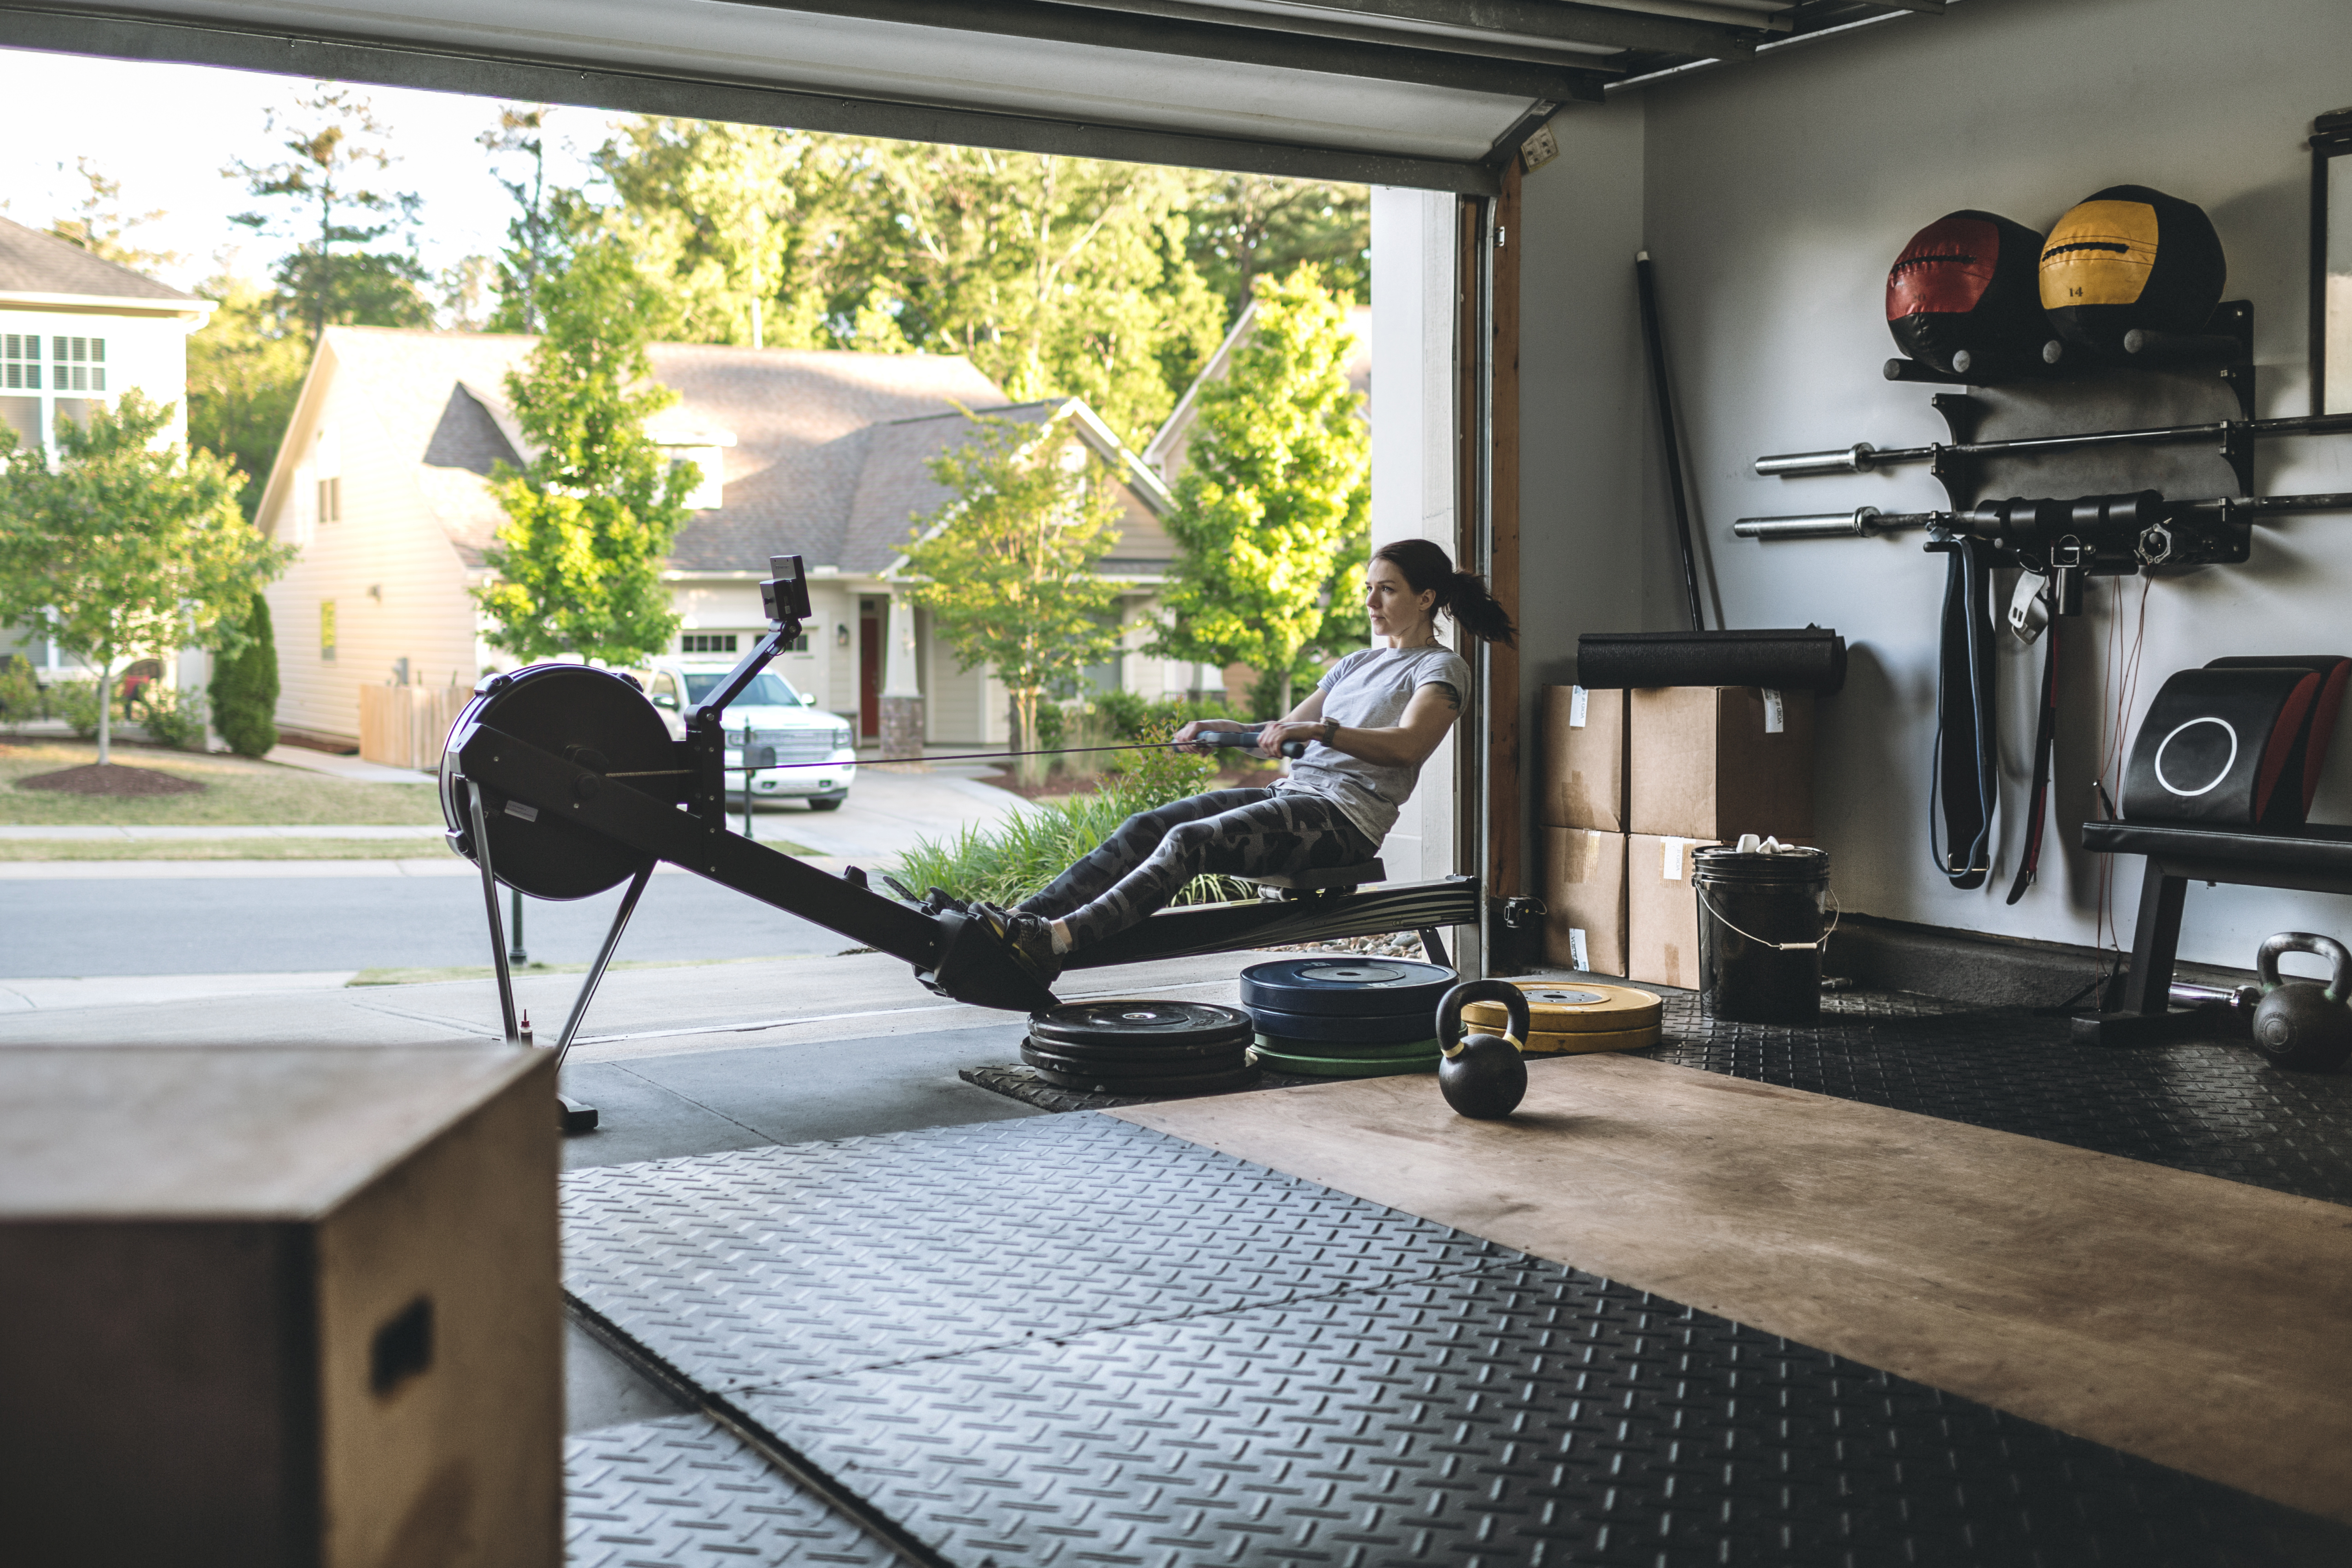 Treadmill, exercise bike, rowing machine: what's the best option for cardio  at home?